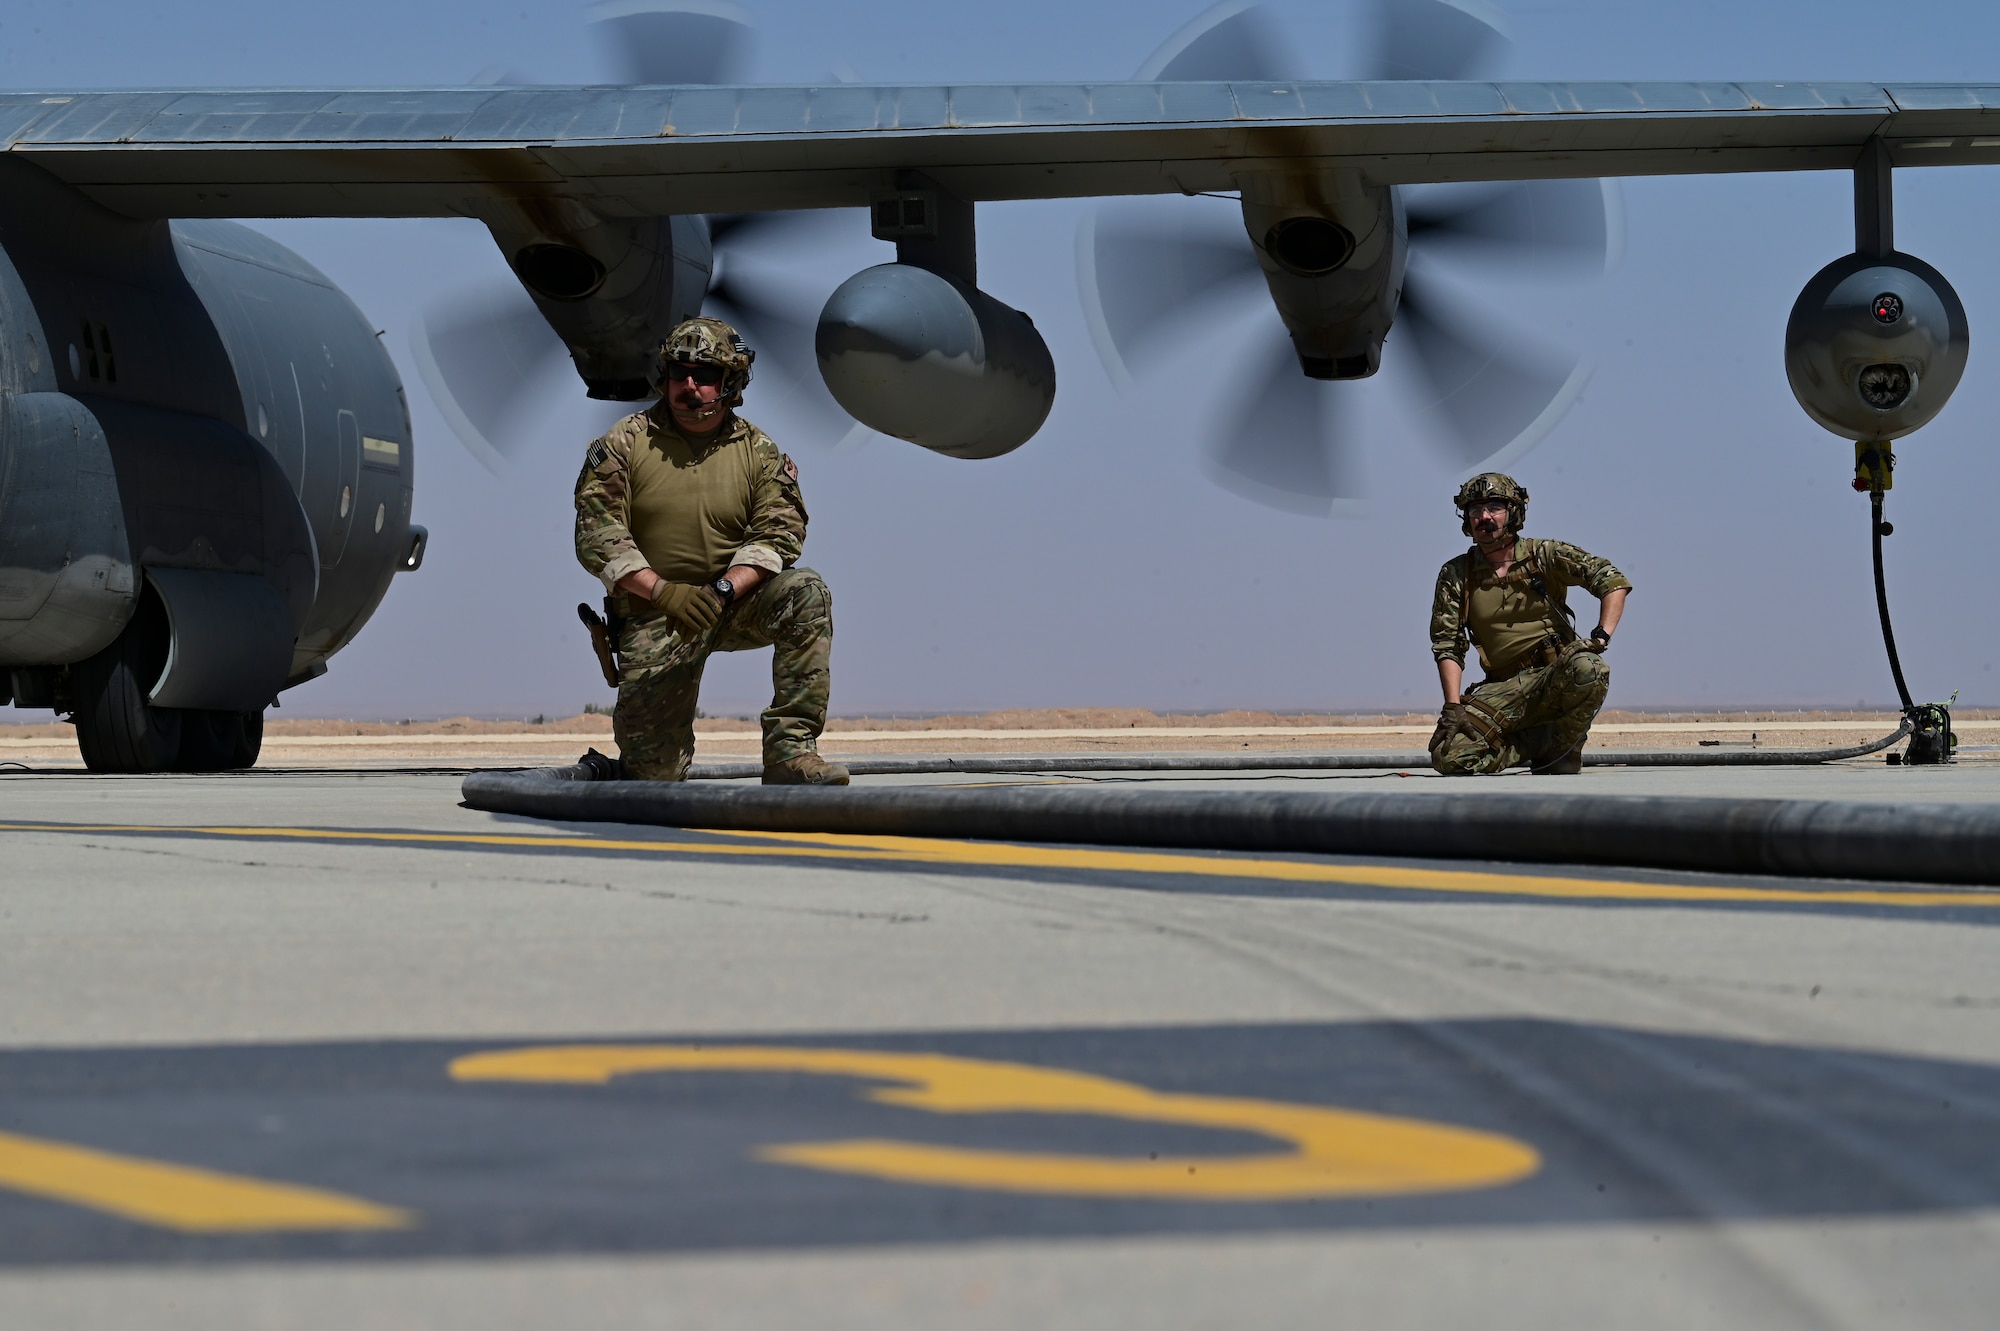 U.S Air Force members with the 332d Air Expeditionary Wing observe a refueling from a HC-130J Combat King II during a Forward Arming Refueling Point (FARP) during a training exercise designed around Agile Combat Employment, at an undisclosed location in Southwest Asia, September 27-28, 2022. FARP provides flexibility and allows aircraft to be refueled in austere locations. (U.S Photo by Staff Sgt. Ashley Sokolov)